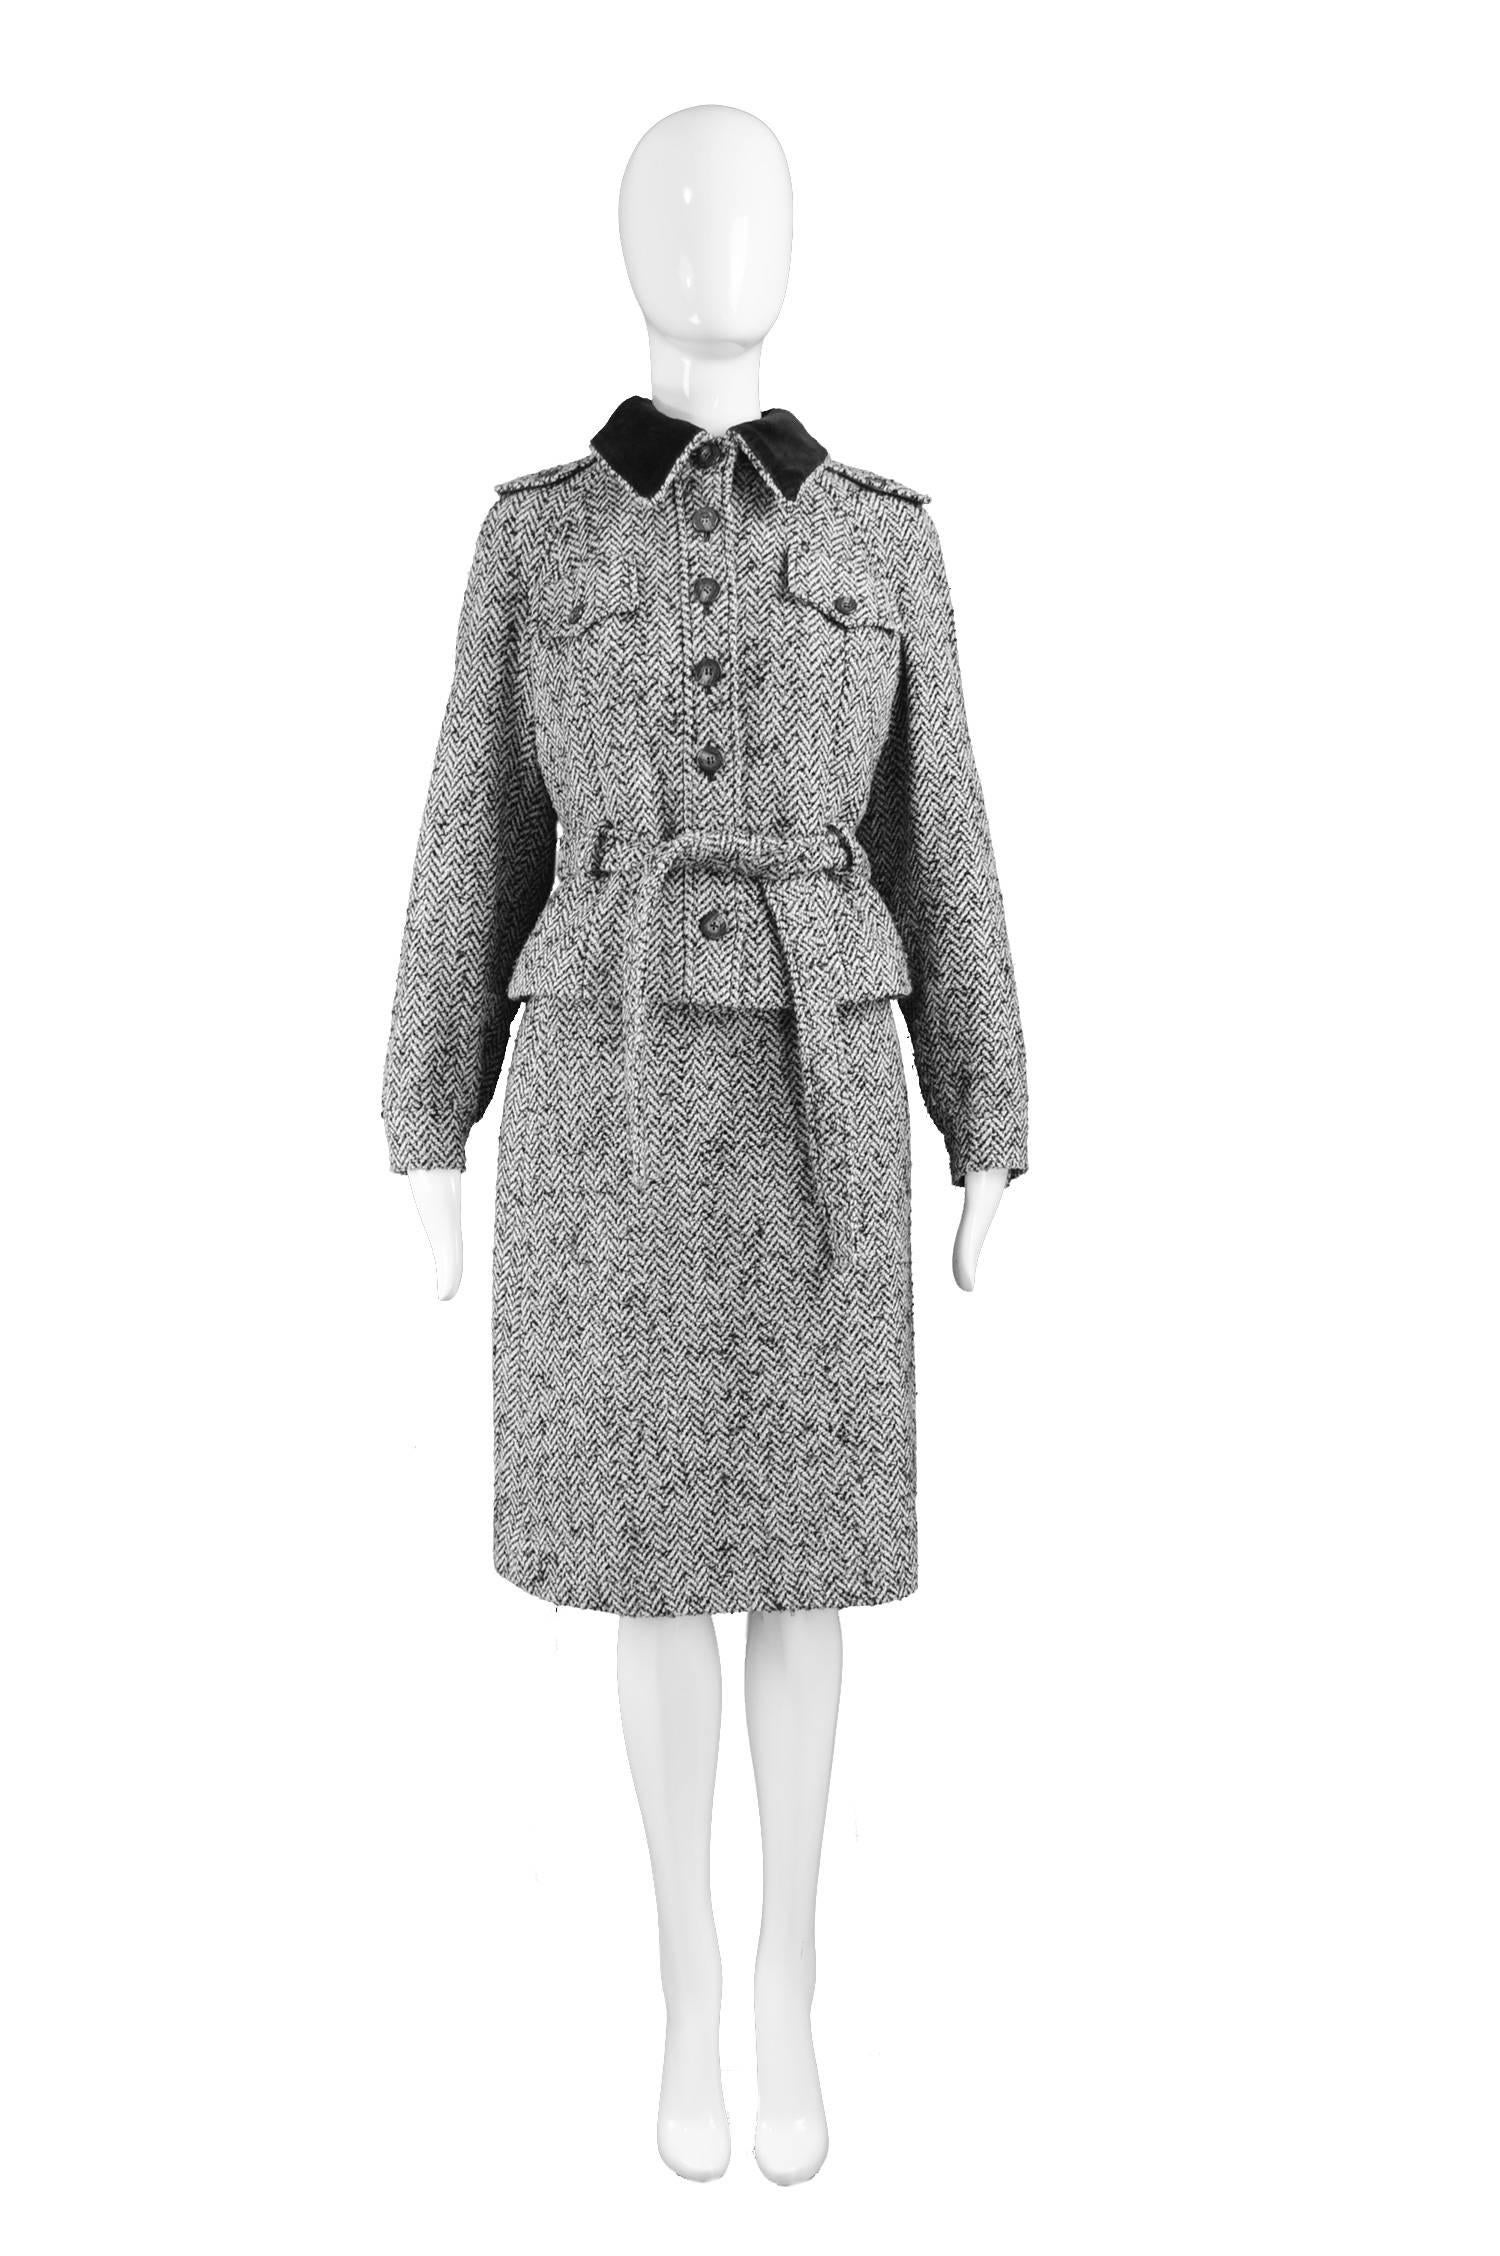 Louis Féraud Vintage Grey Wool Tweed Skirt Suit with Velvet Collar, 1970s

Estimated Size: UK 8-10/ US 4-6/ EU 36-38. Please check measurements.
Jacket
Bust - 36” / 91cm (please leave roughly 2-4inch room for movement and clothes underneath)
Waist -